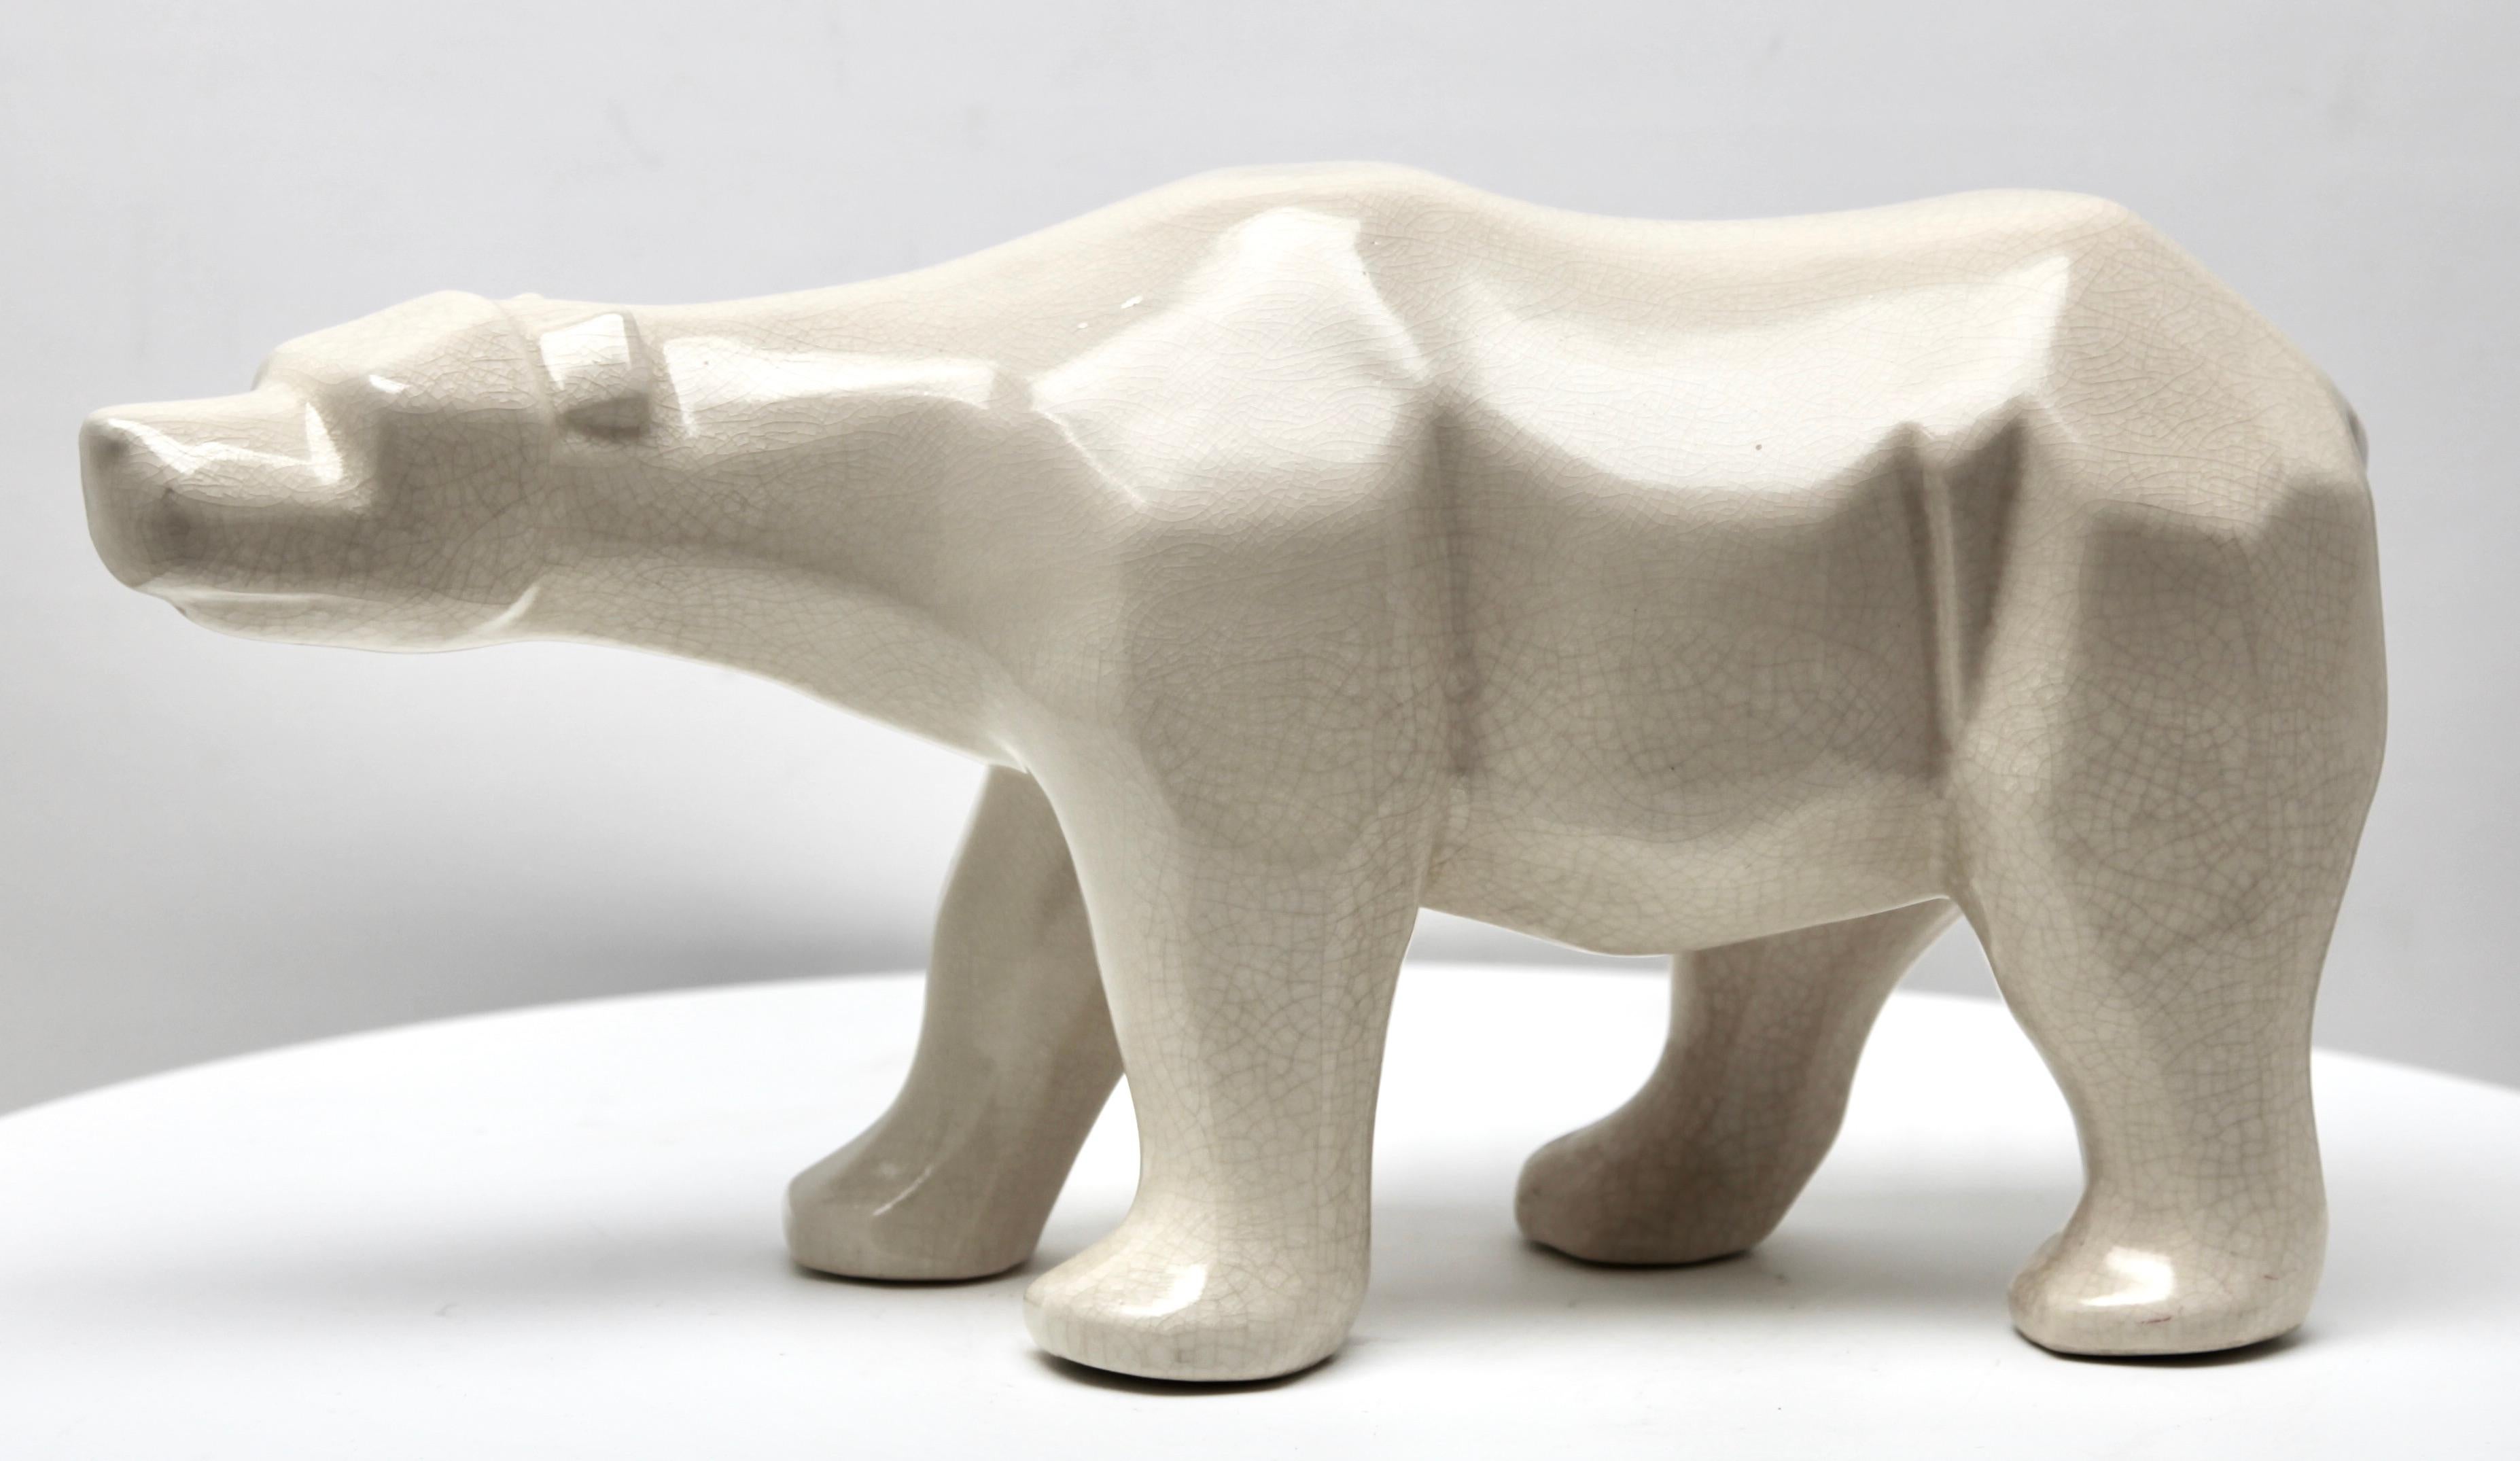 Art Deco Cubist style figurine in white glazed Ceramic. Finely detailed and modelled figurine of a Polar Bear 
Stamp L&V Ceram
France 1930s

Condition: Very good.
Dimensions Height: 8.5 inch. (21.59 cm)
Width: 16 inch. (40.64 cm)
Depth: 5.25 inch.